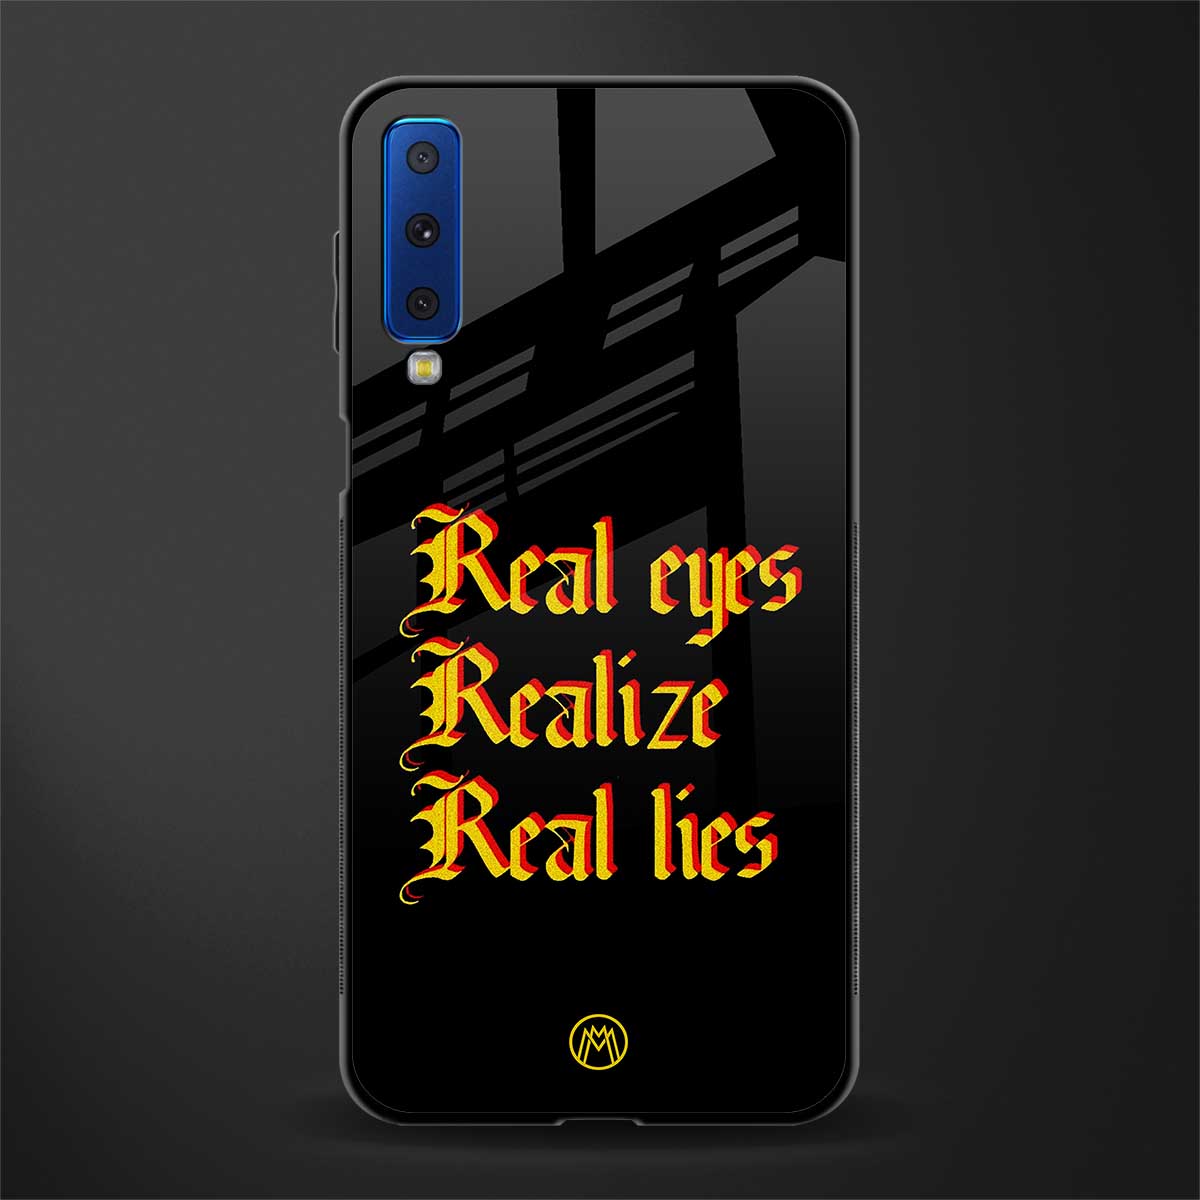 real eyes realize real lies quote glass case for samsung galaxy a7 2018 image